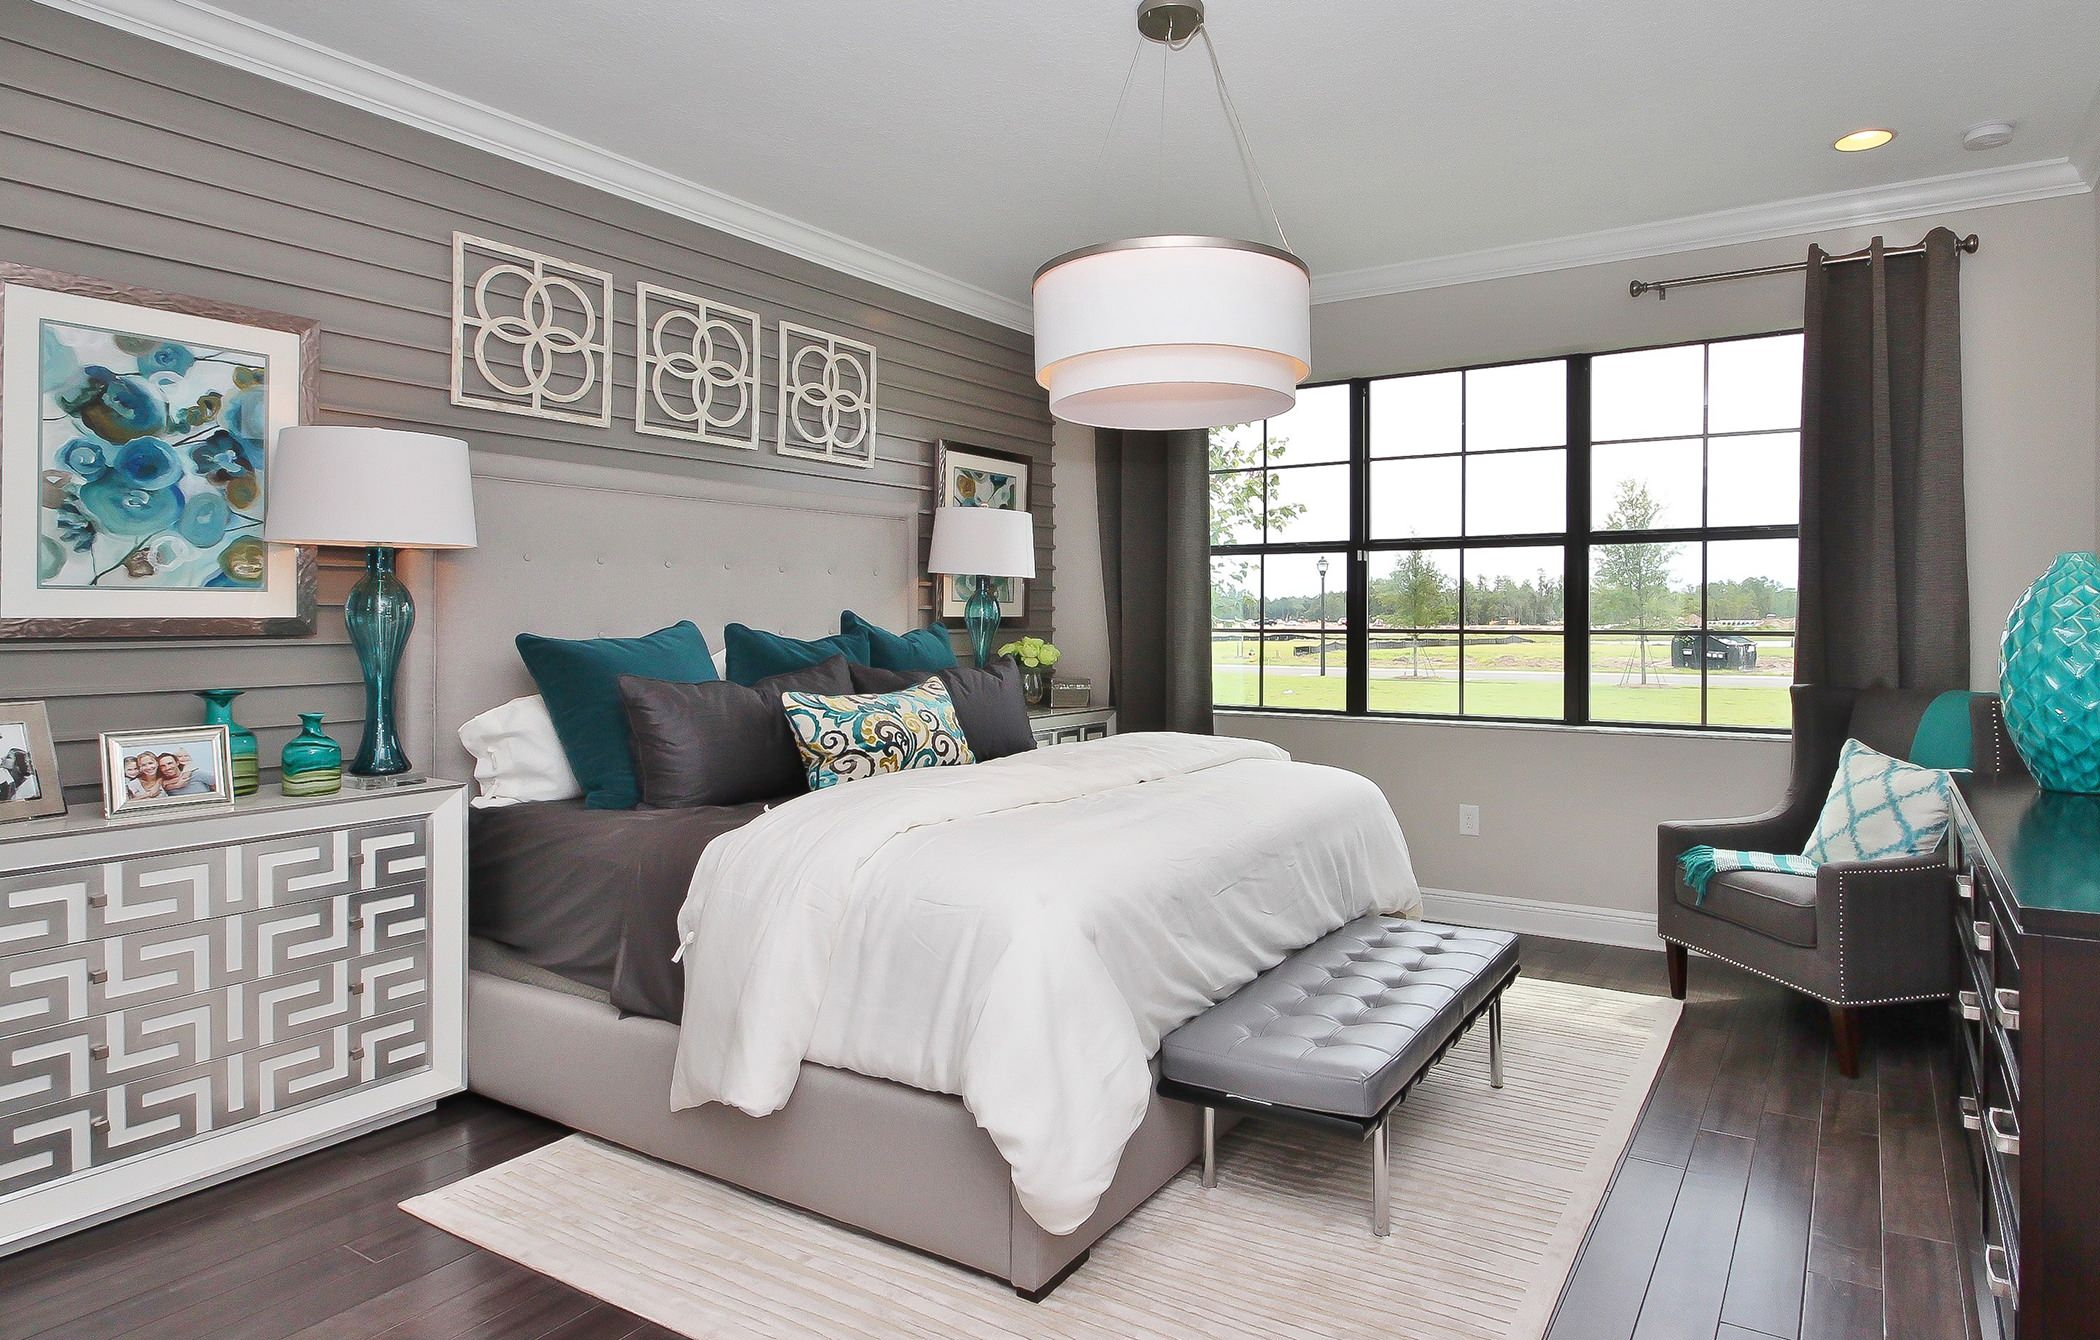 Attracktive grey and teal bedroom Turquoise And Gray Bedroom Ideas Photos Houzz